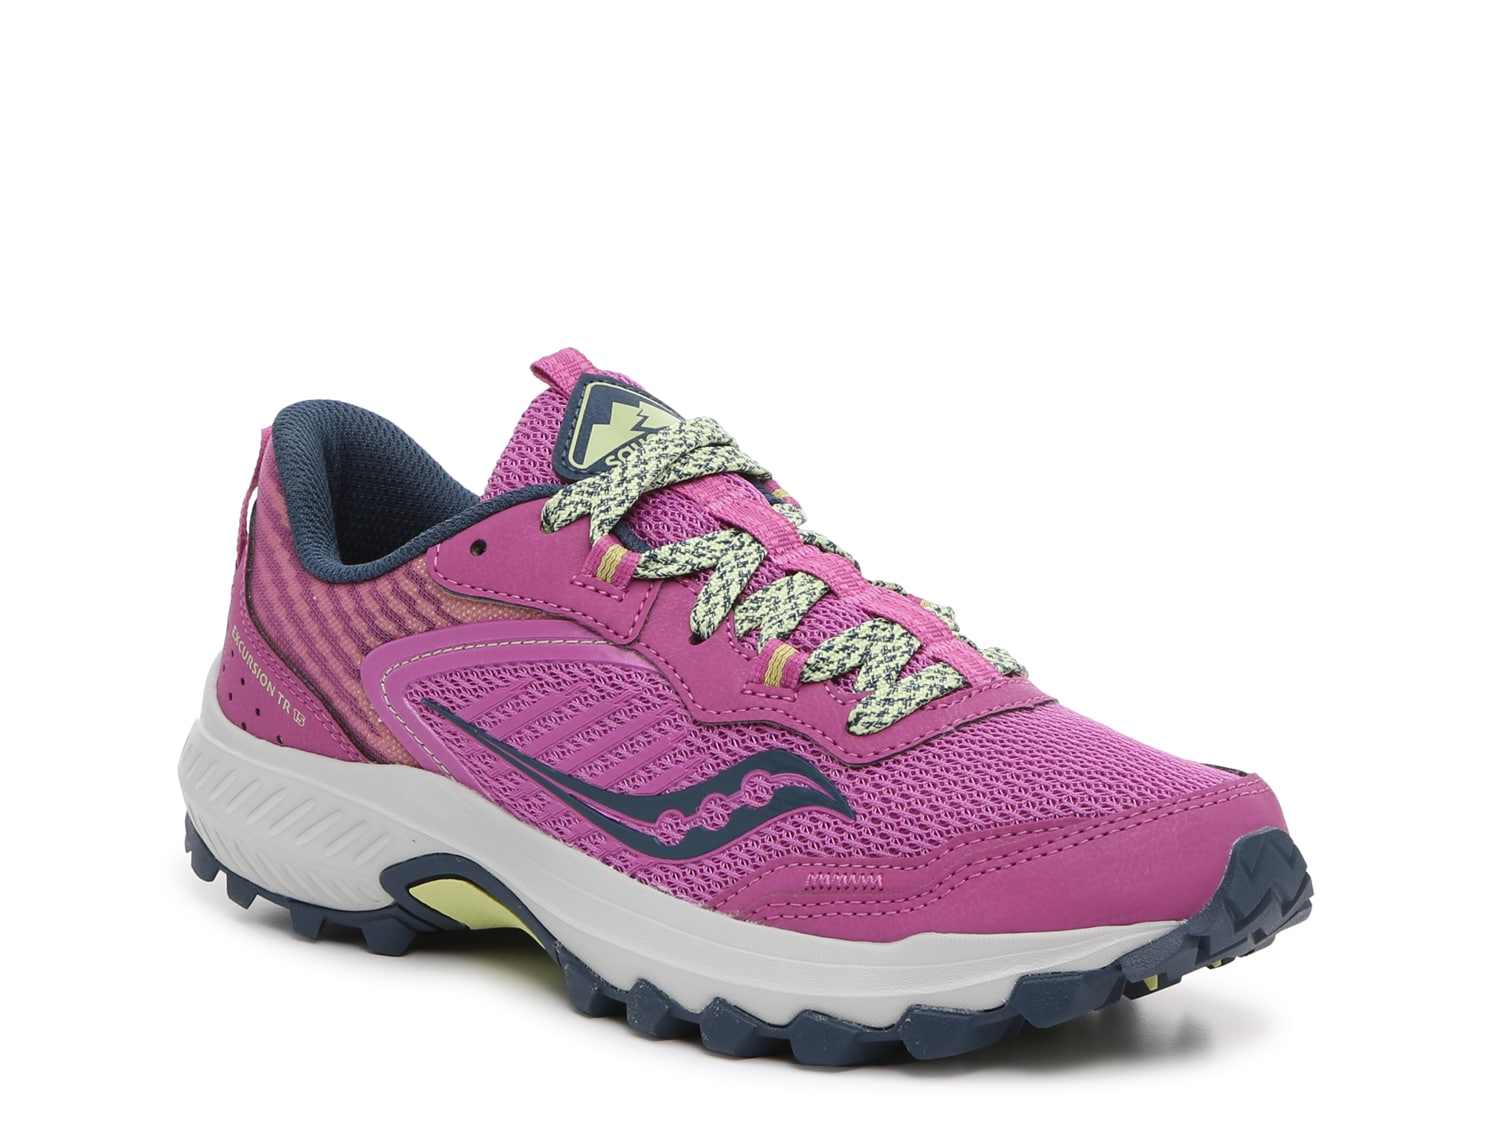 Saucony Excursion TR 15 Trail Running Shoe - Women's - Free Shipping | DSW